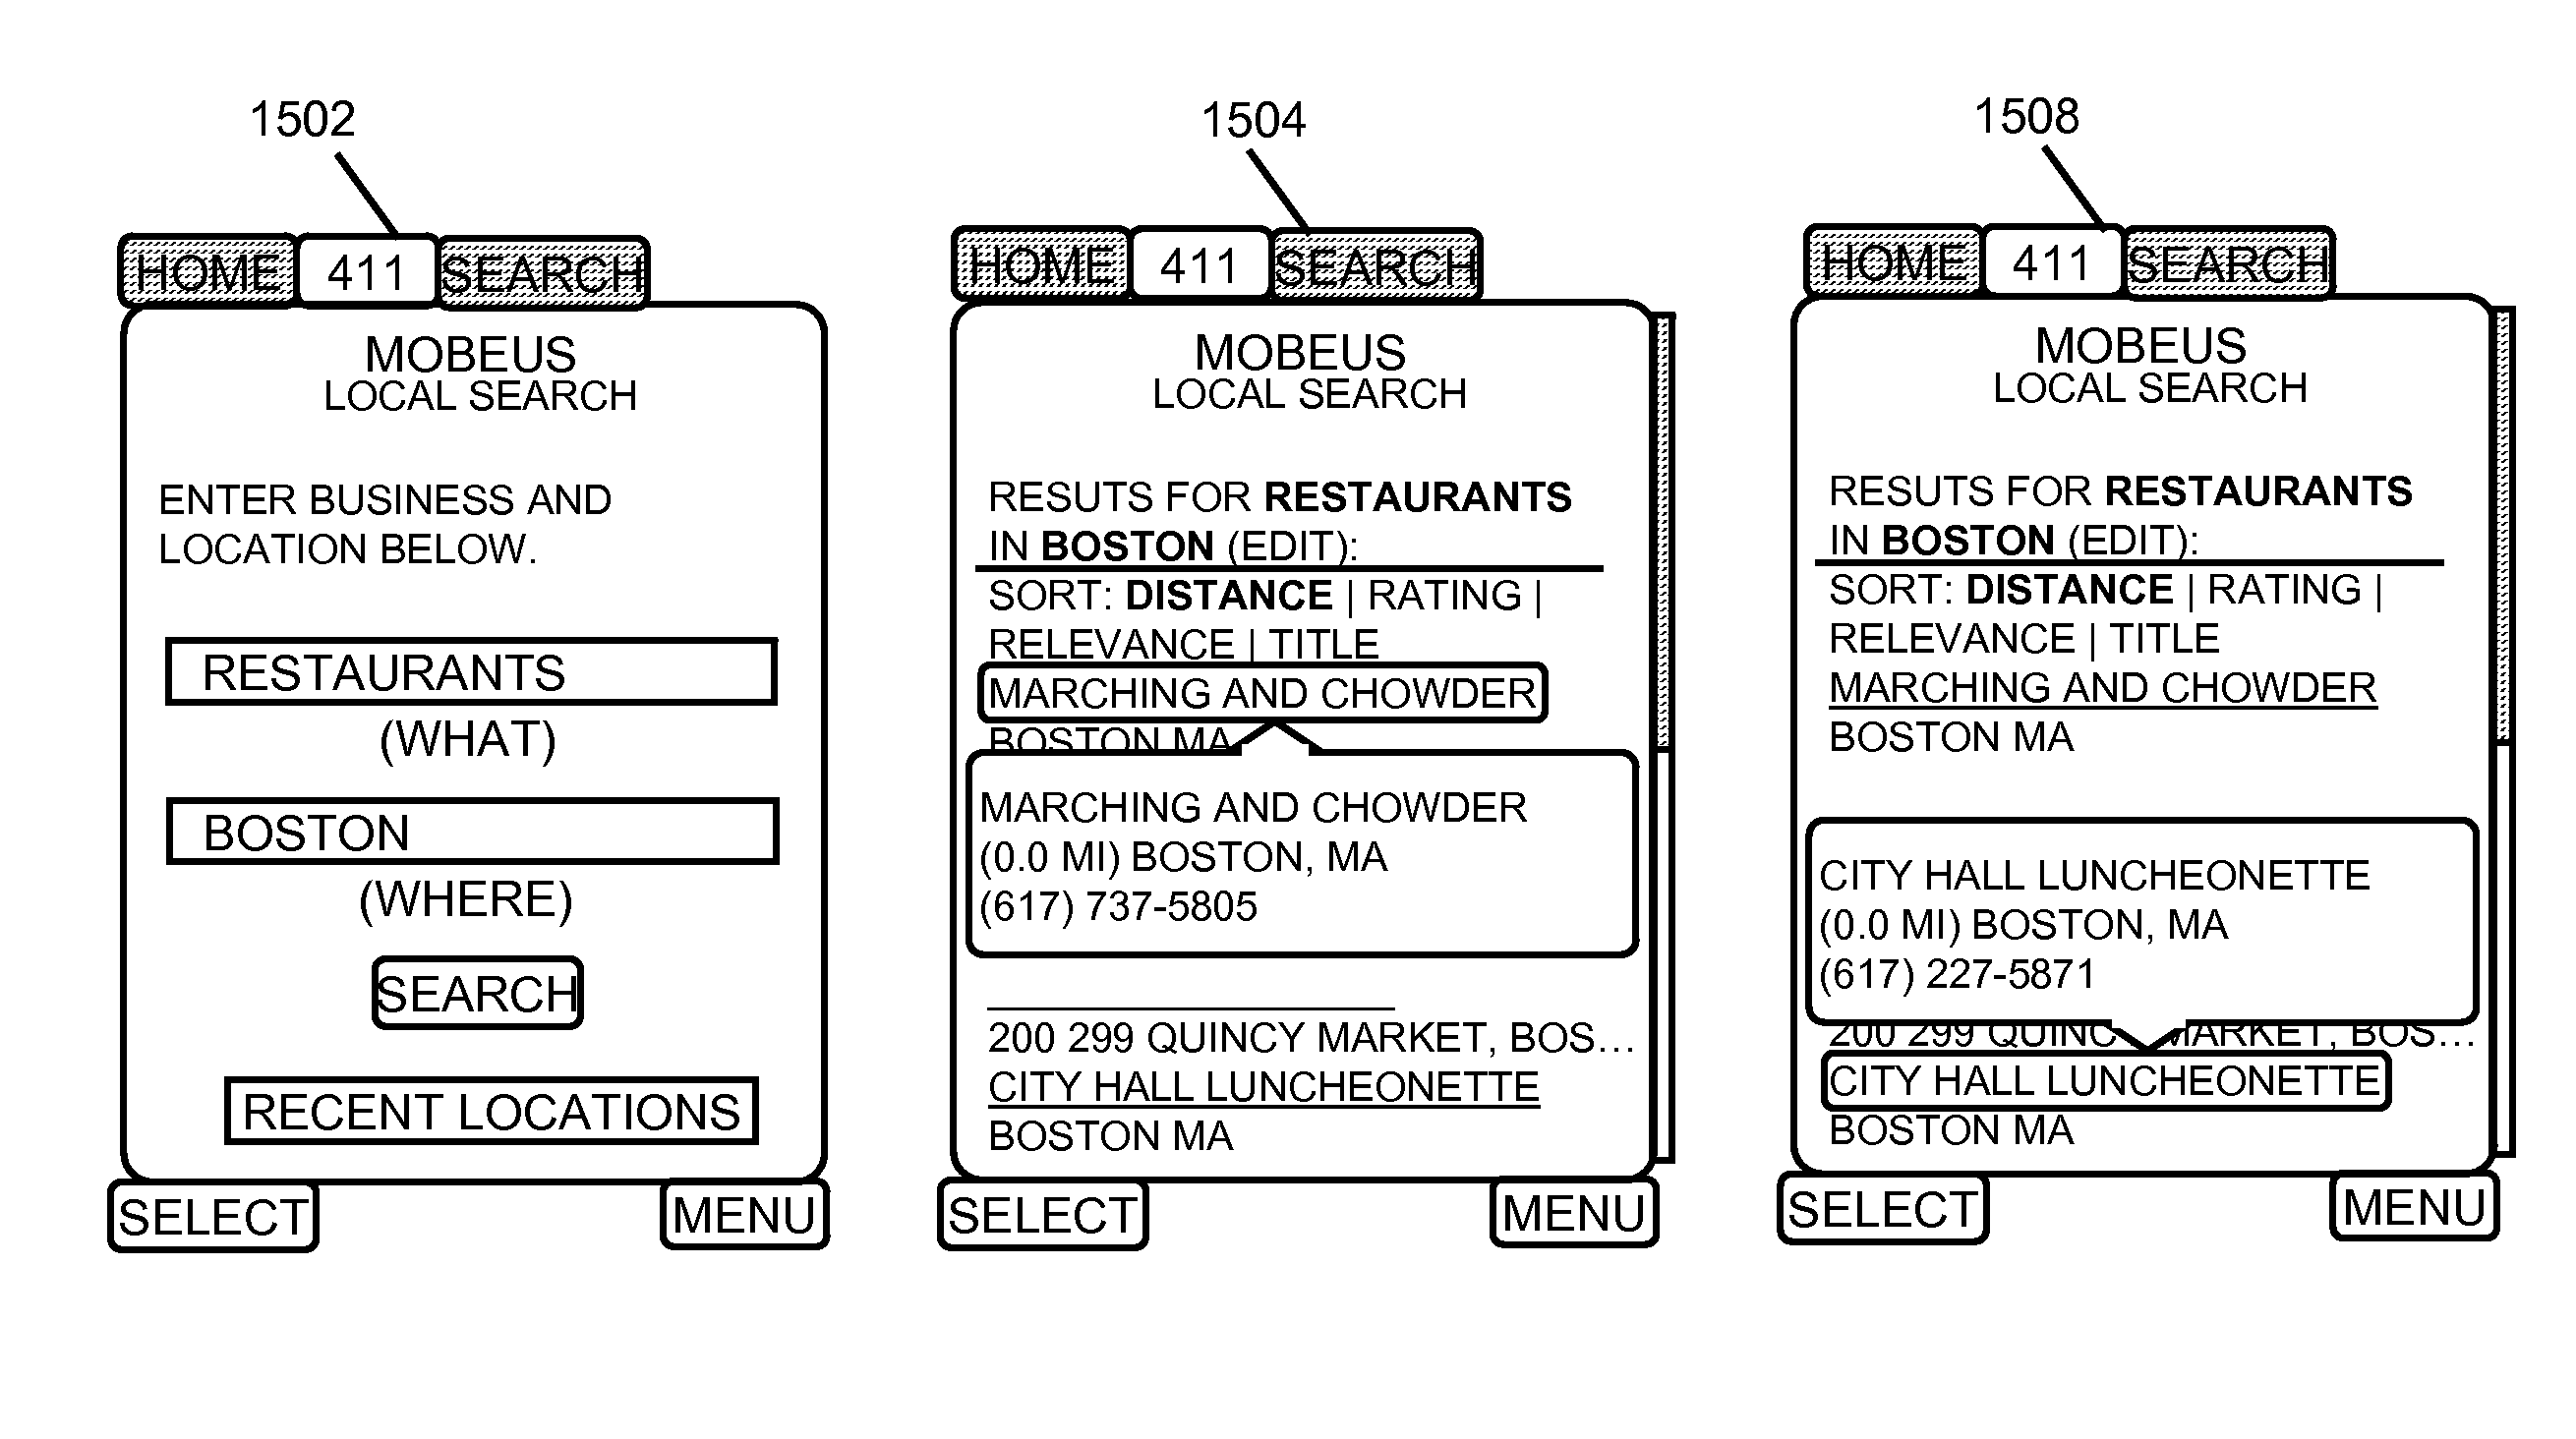 Using speech recognition results based on an unstructured language model in a mobile communication facility application